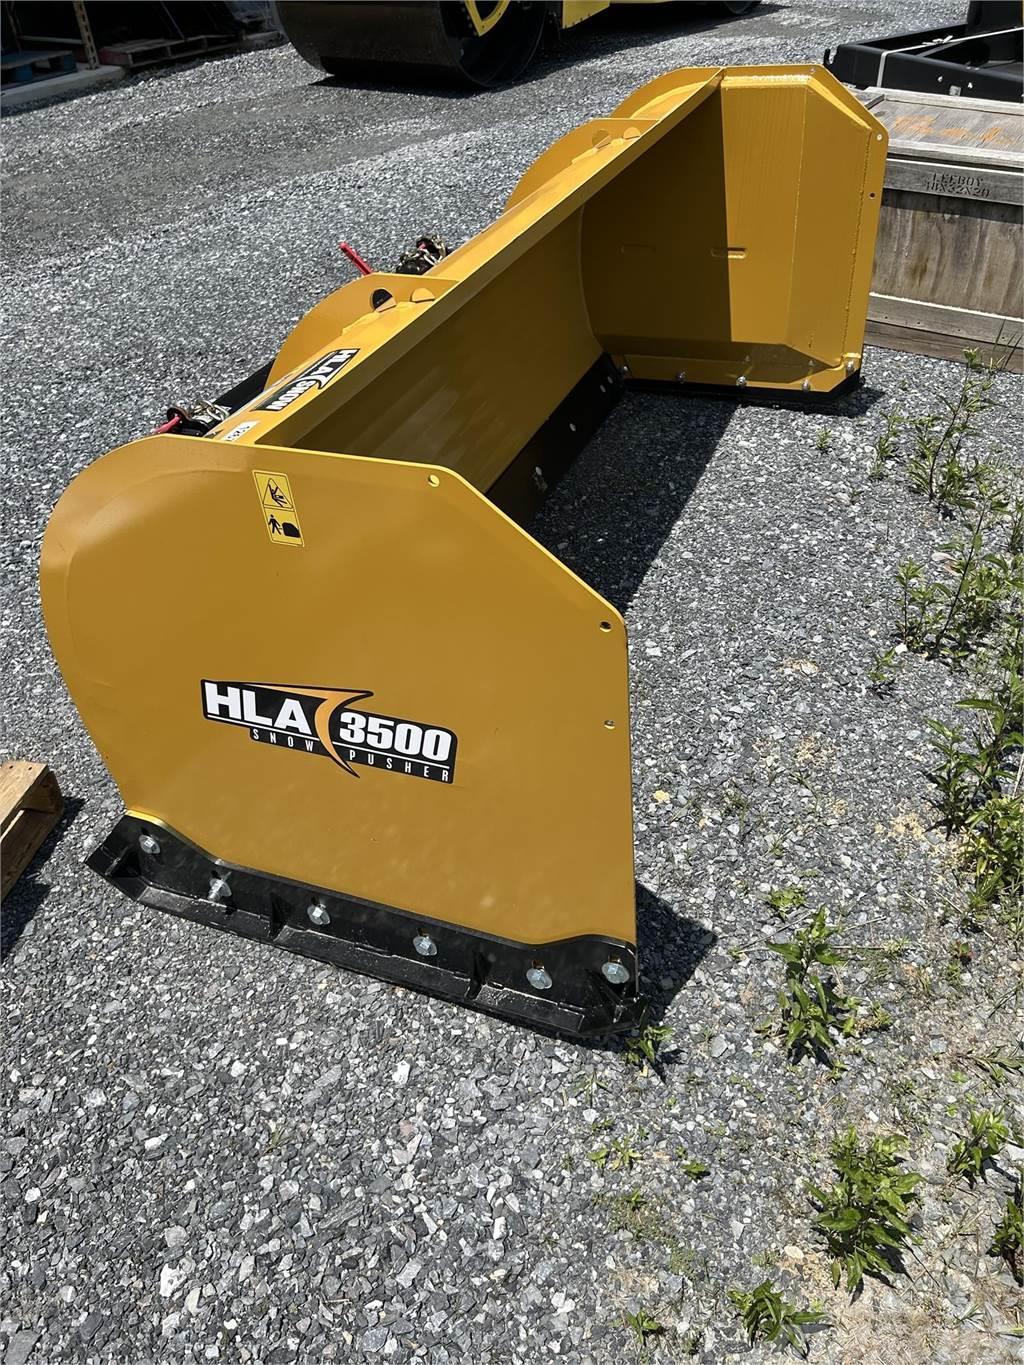 HLA SNOW 3500 Snow blades and plows